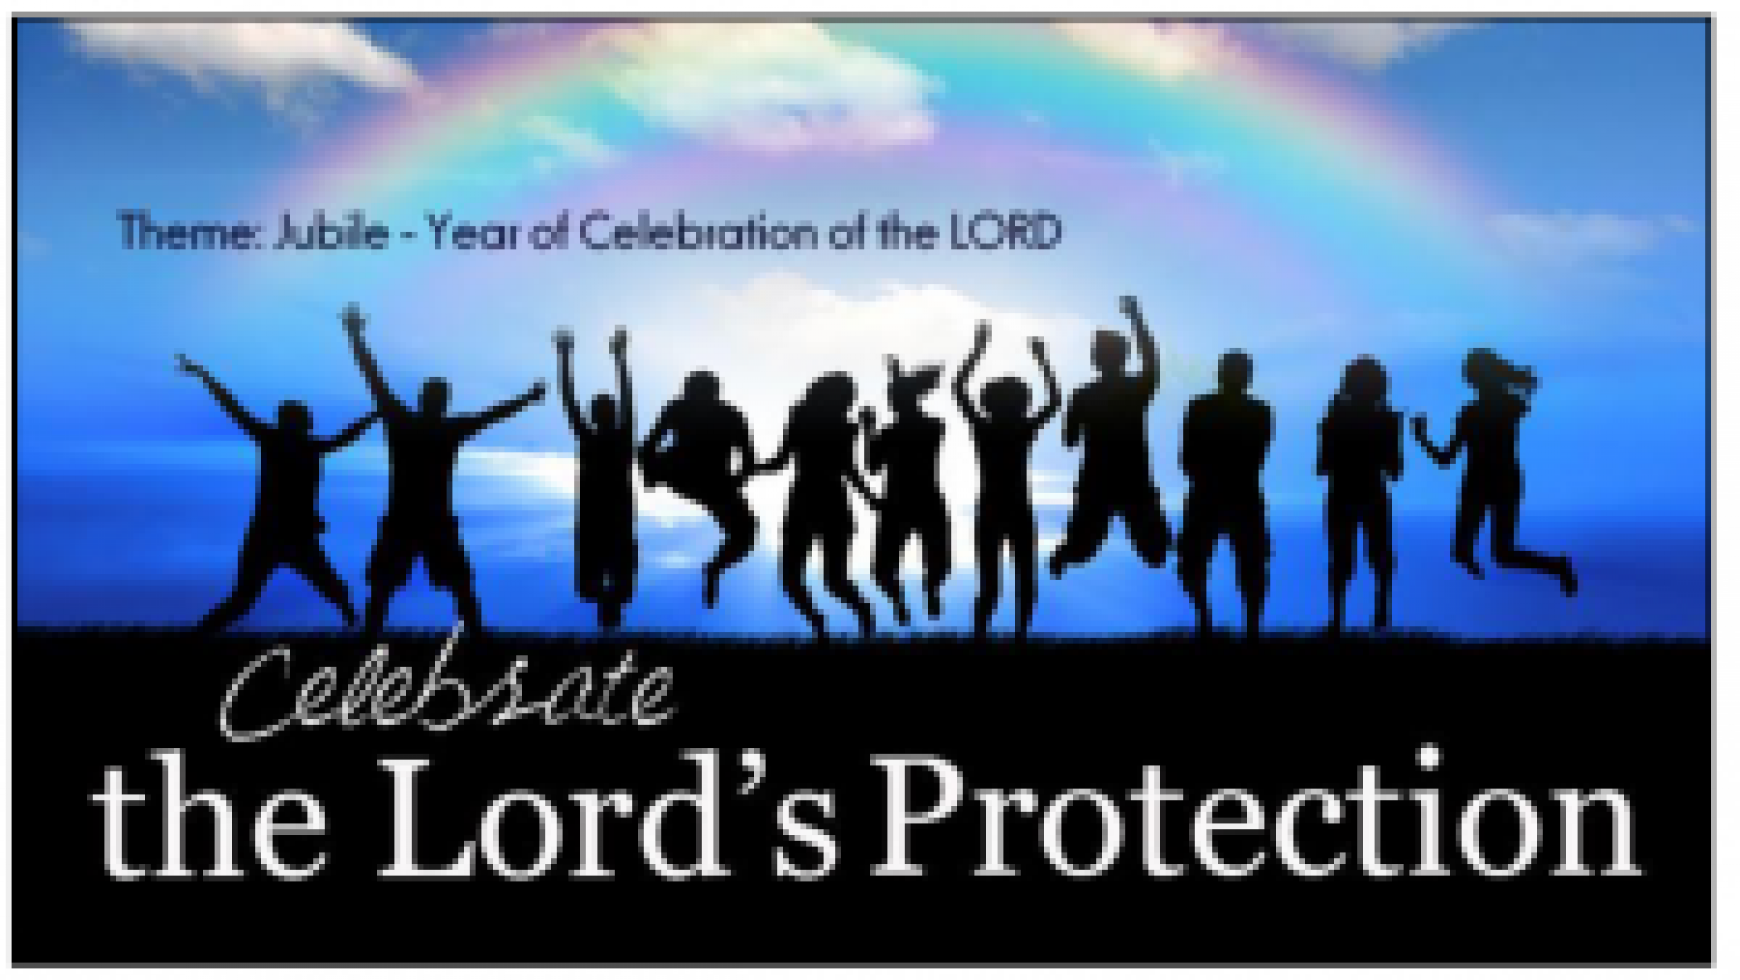 Celebrate the Lord’s Protection